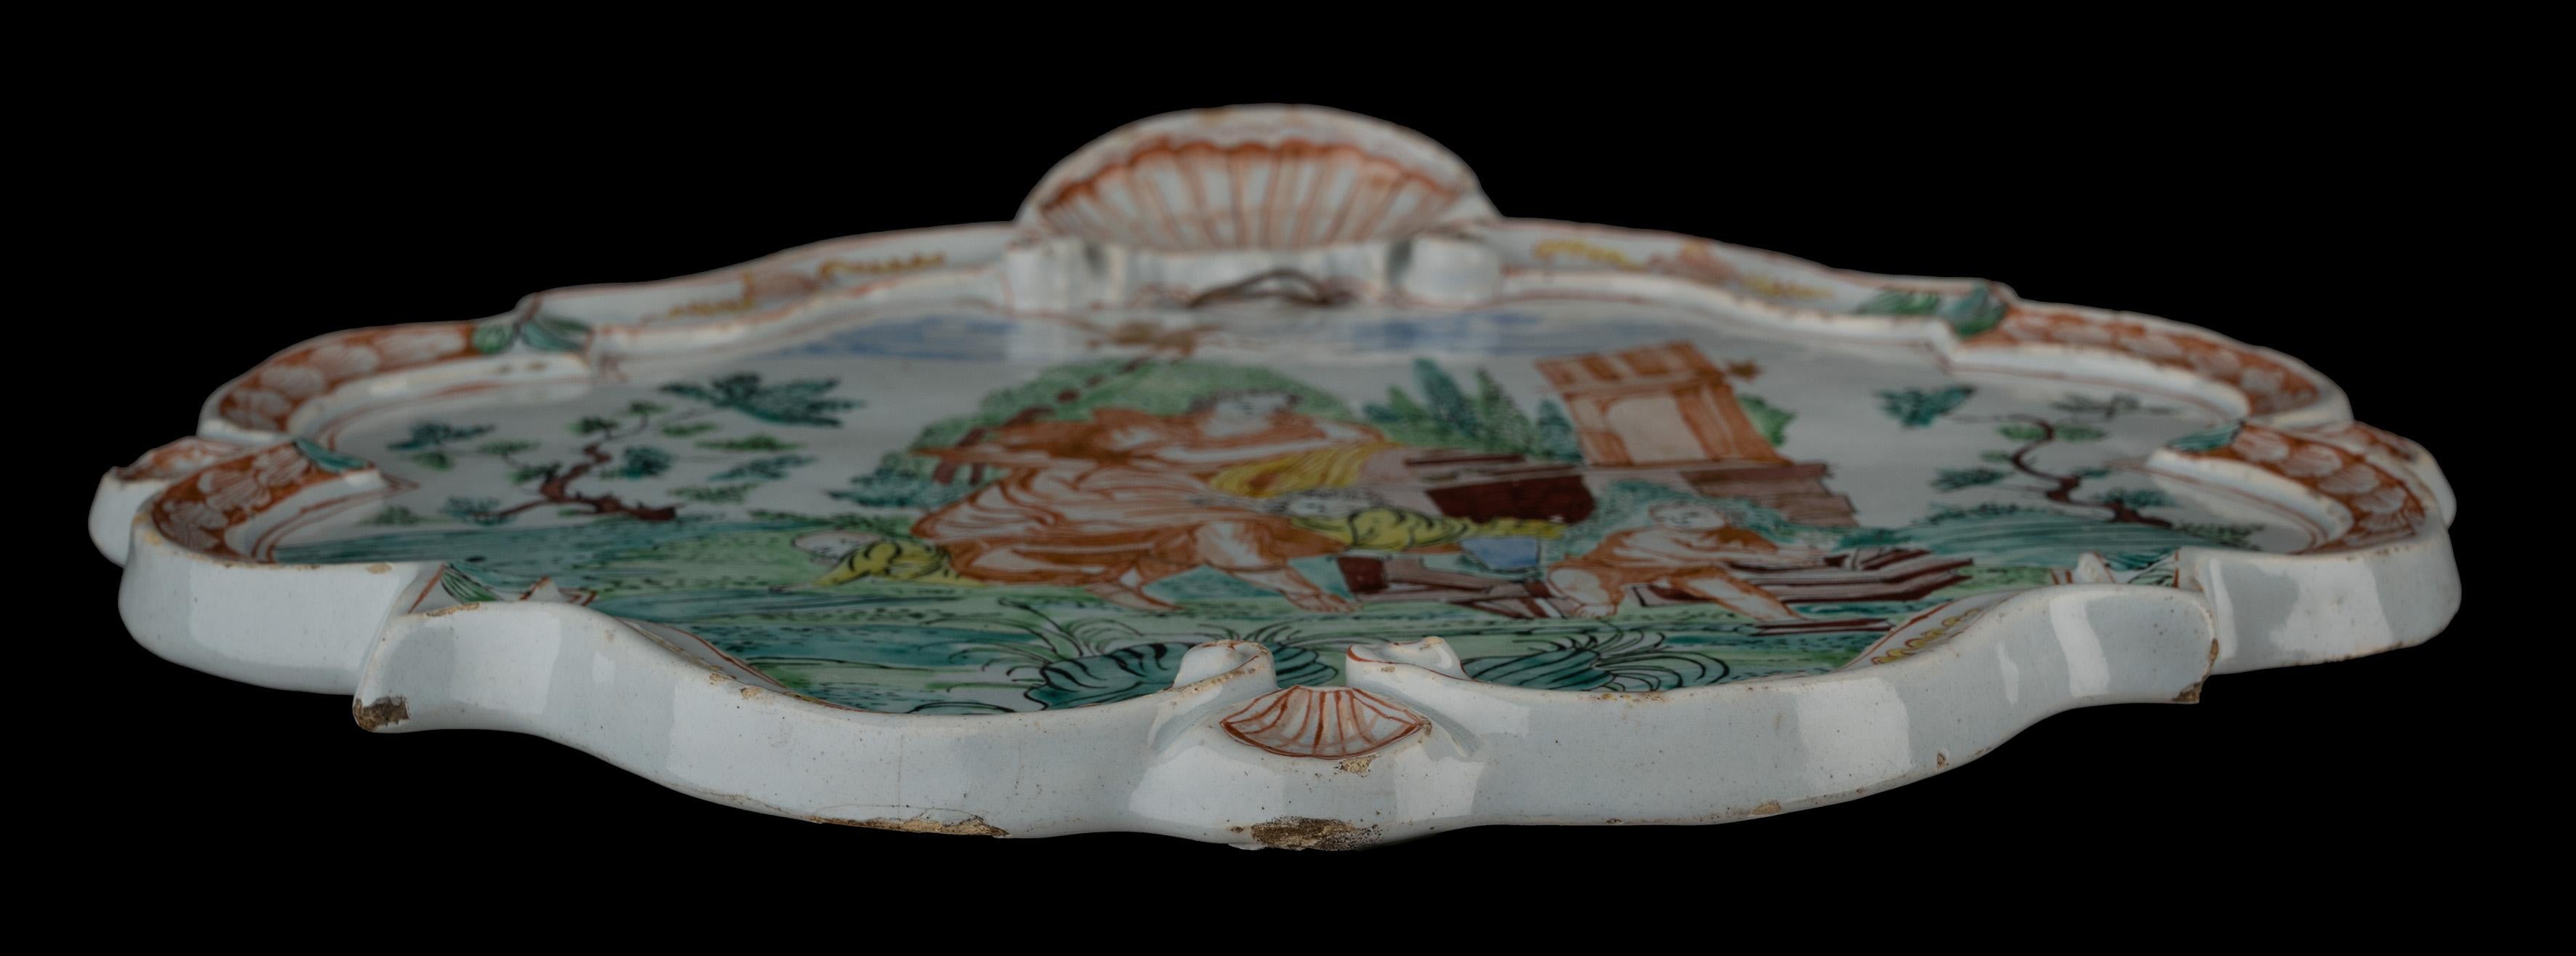 18th Century Delft Polychrome plaque with an allegorical depiction 1730-1750  For Sale